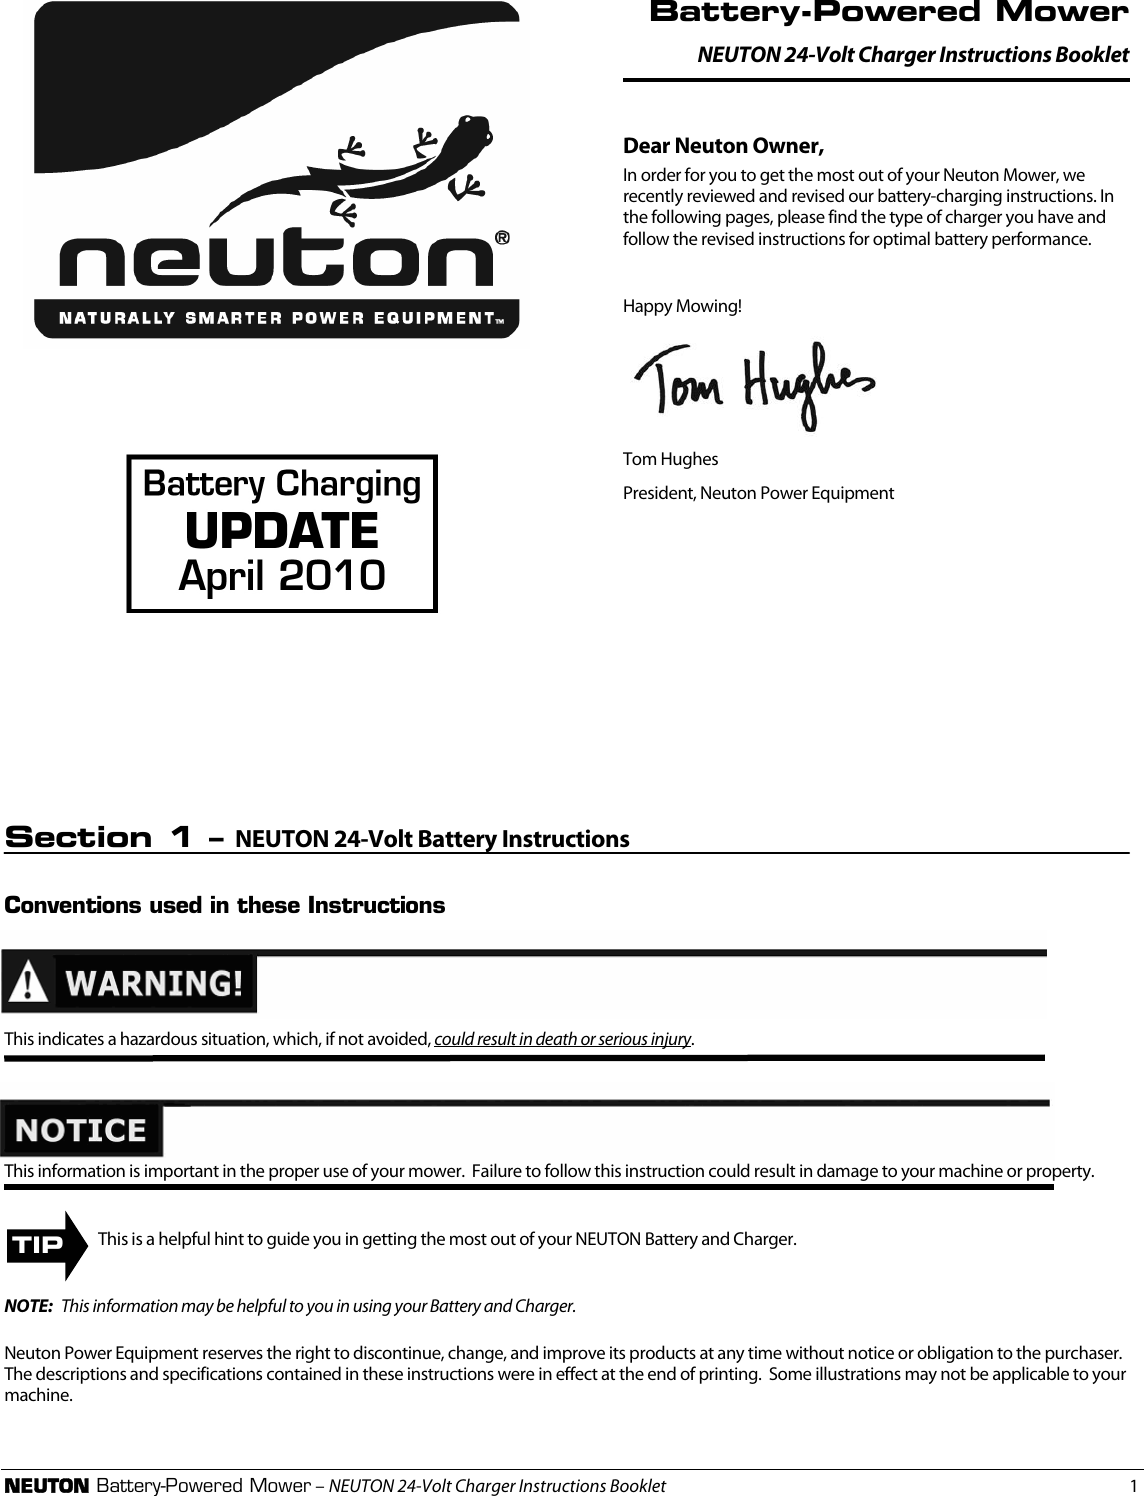 Page 1 of 8 - !! 272831 Neuton 24-Volt Charger Instructions Booklet